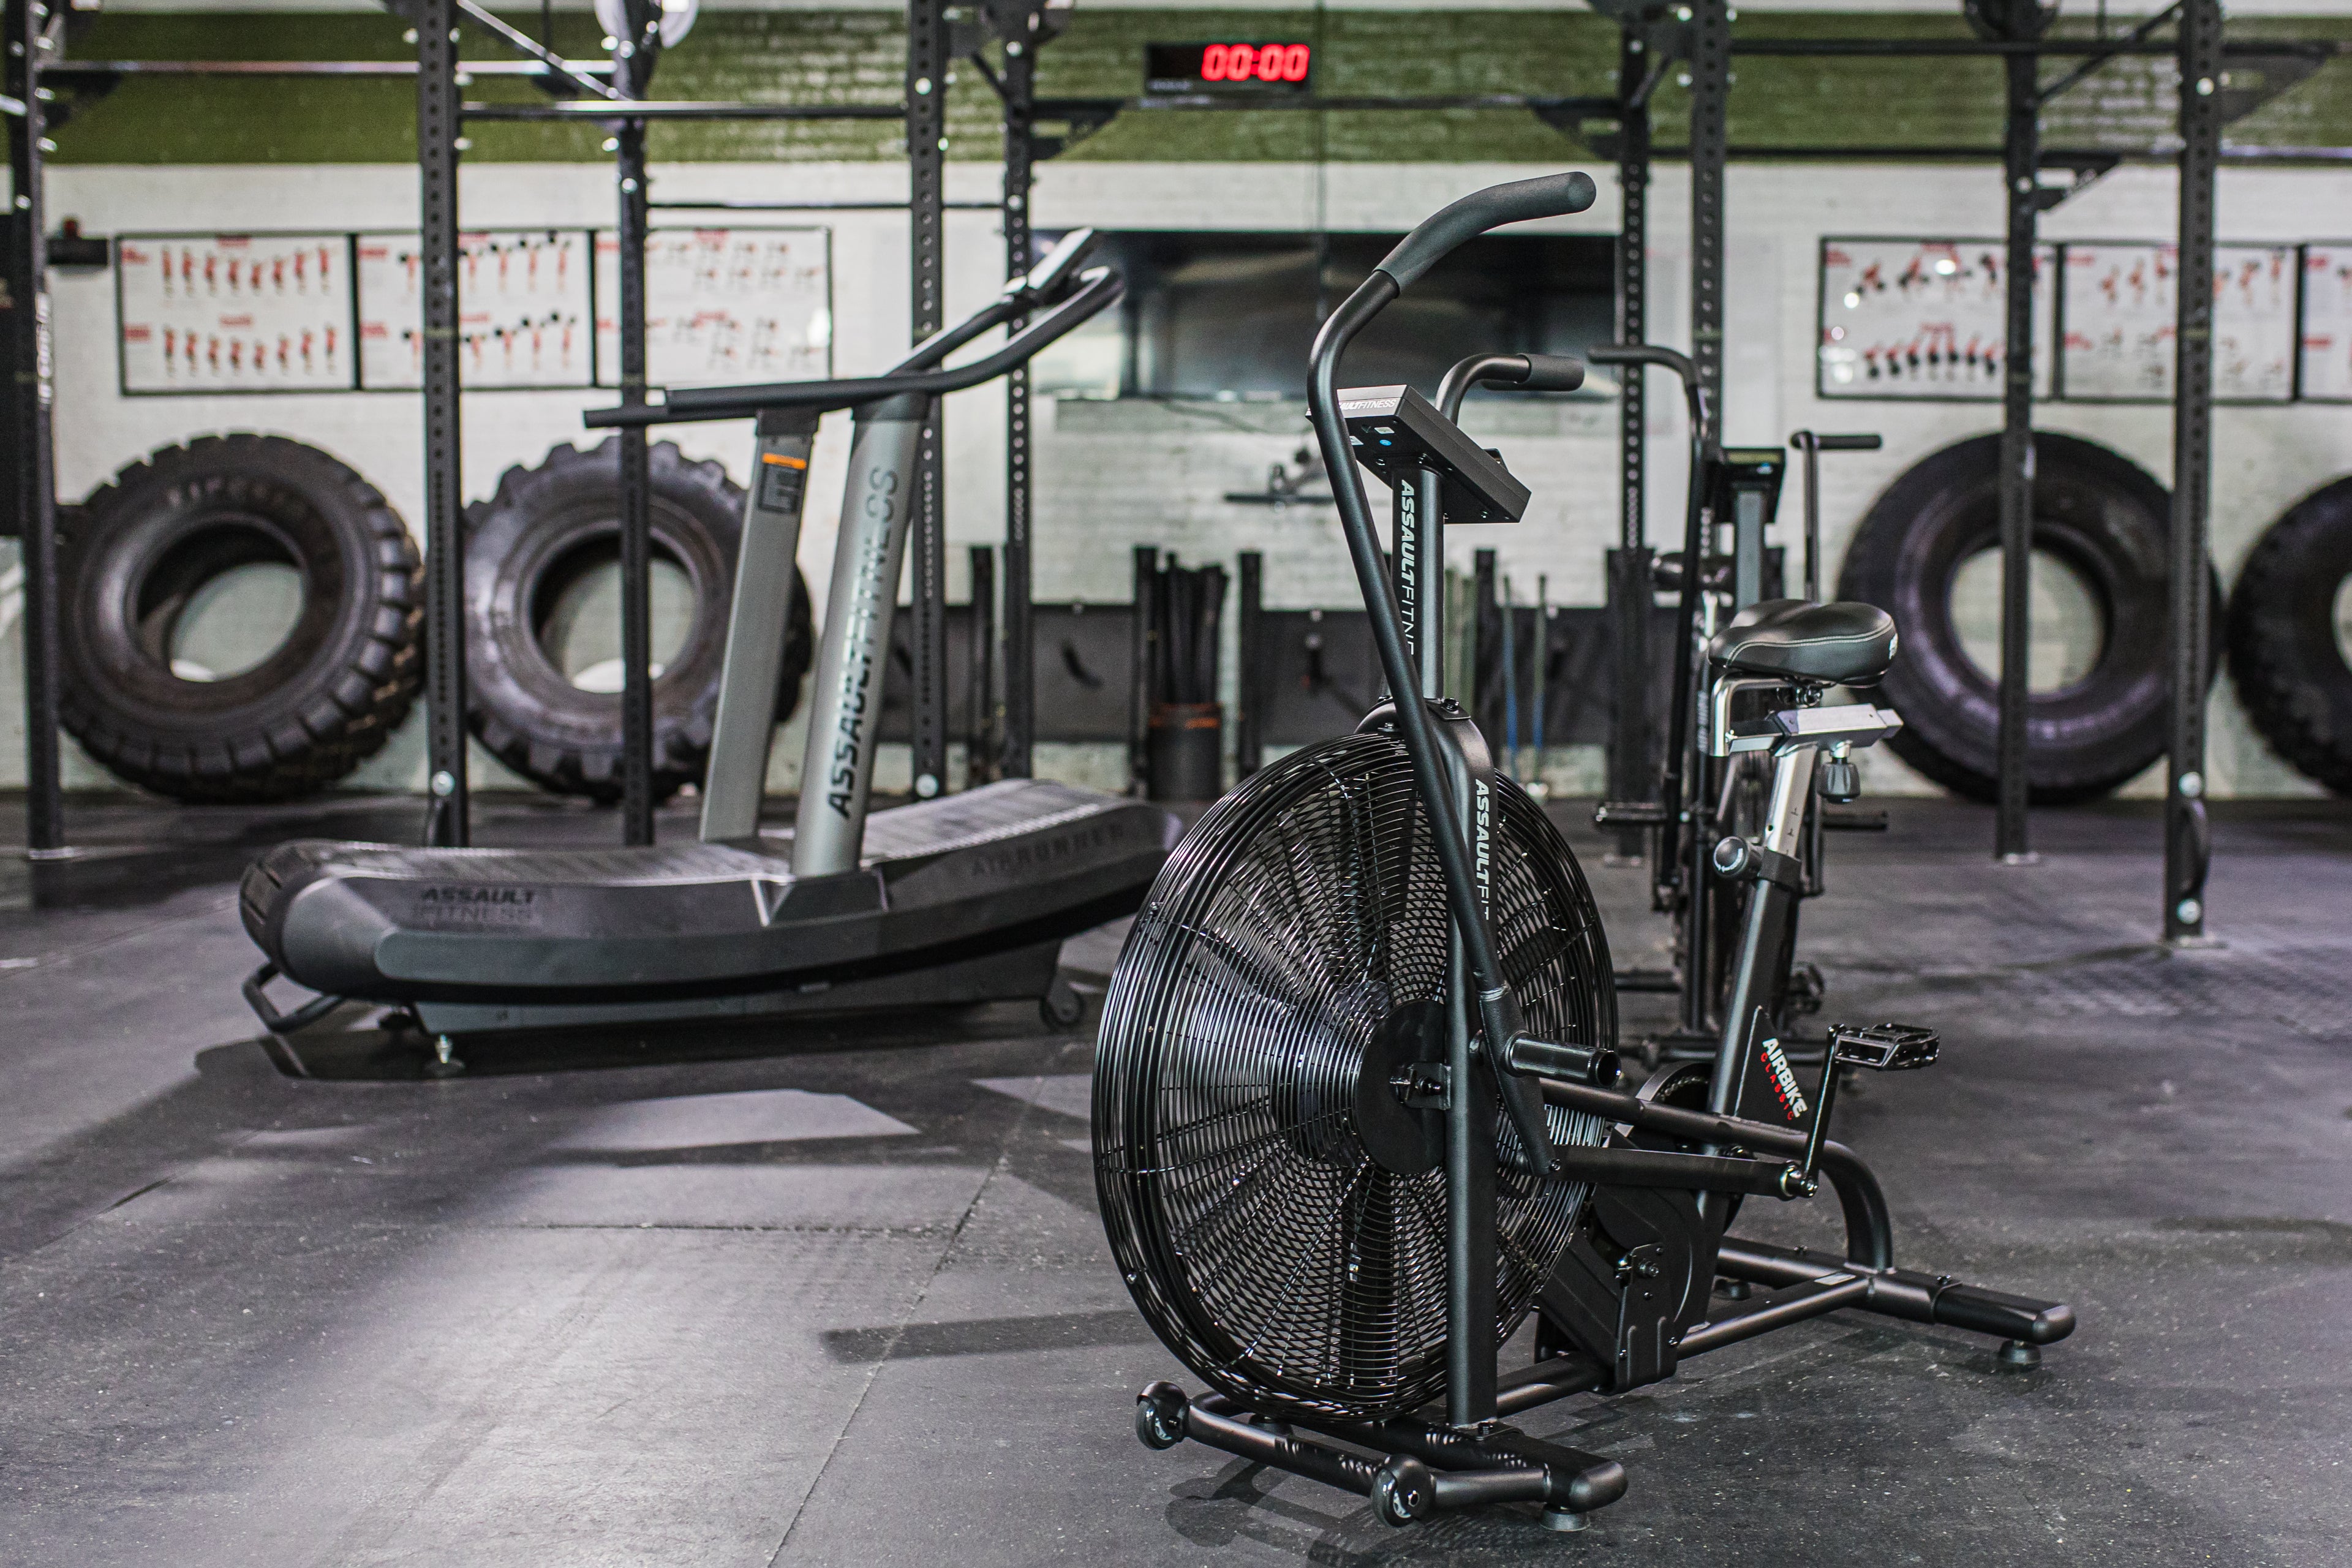 The Assaultbike Classic and Assaultrunner positioned at angles among other fitness equipment in a gym